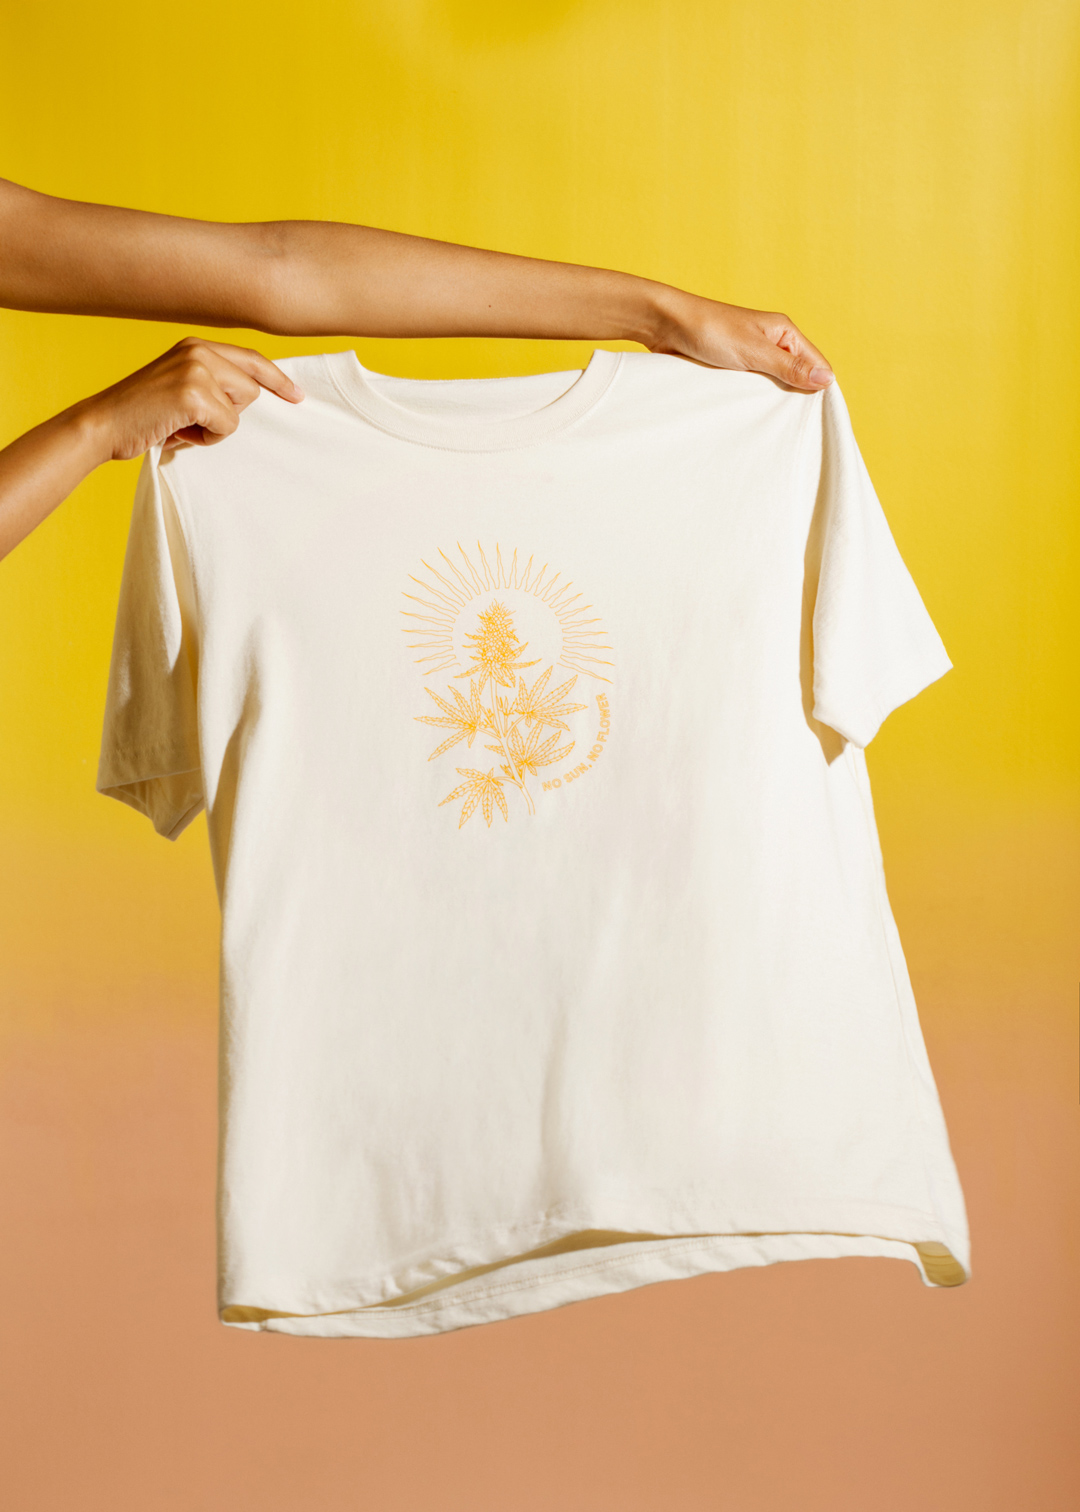 Summer Flower Tee with yellow background